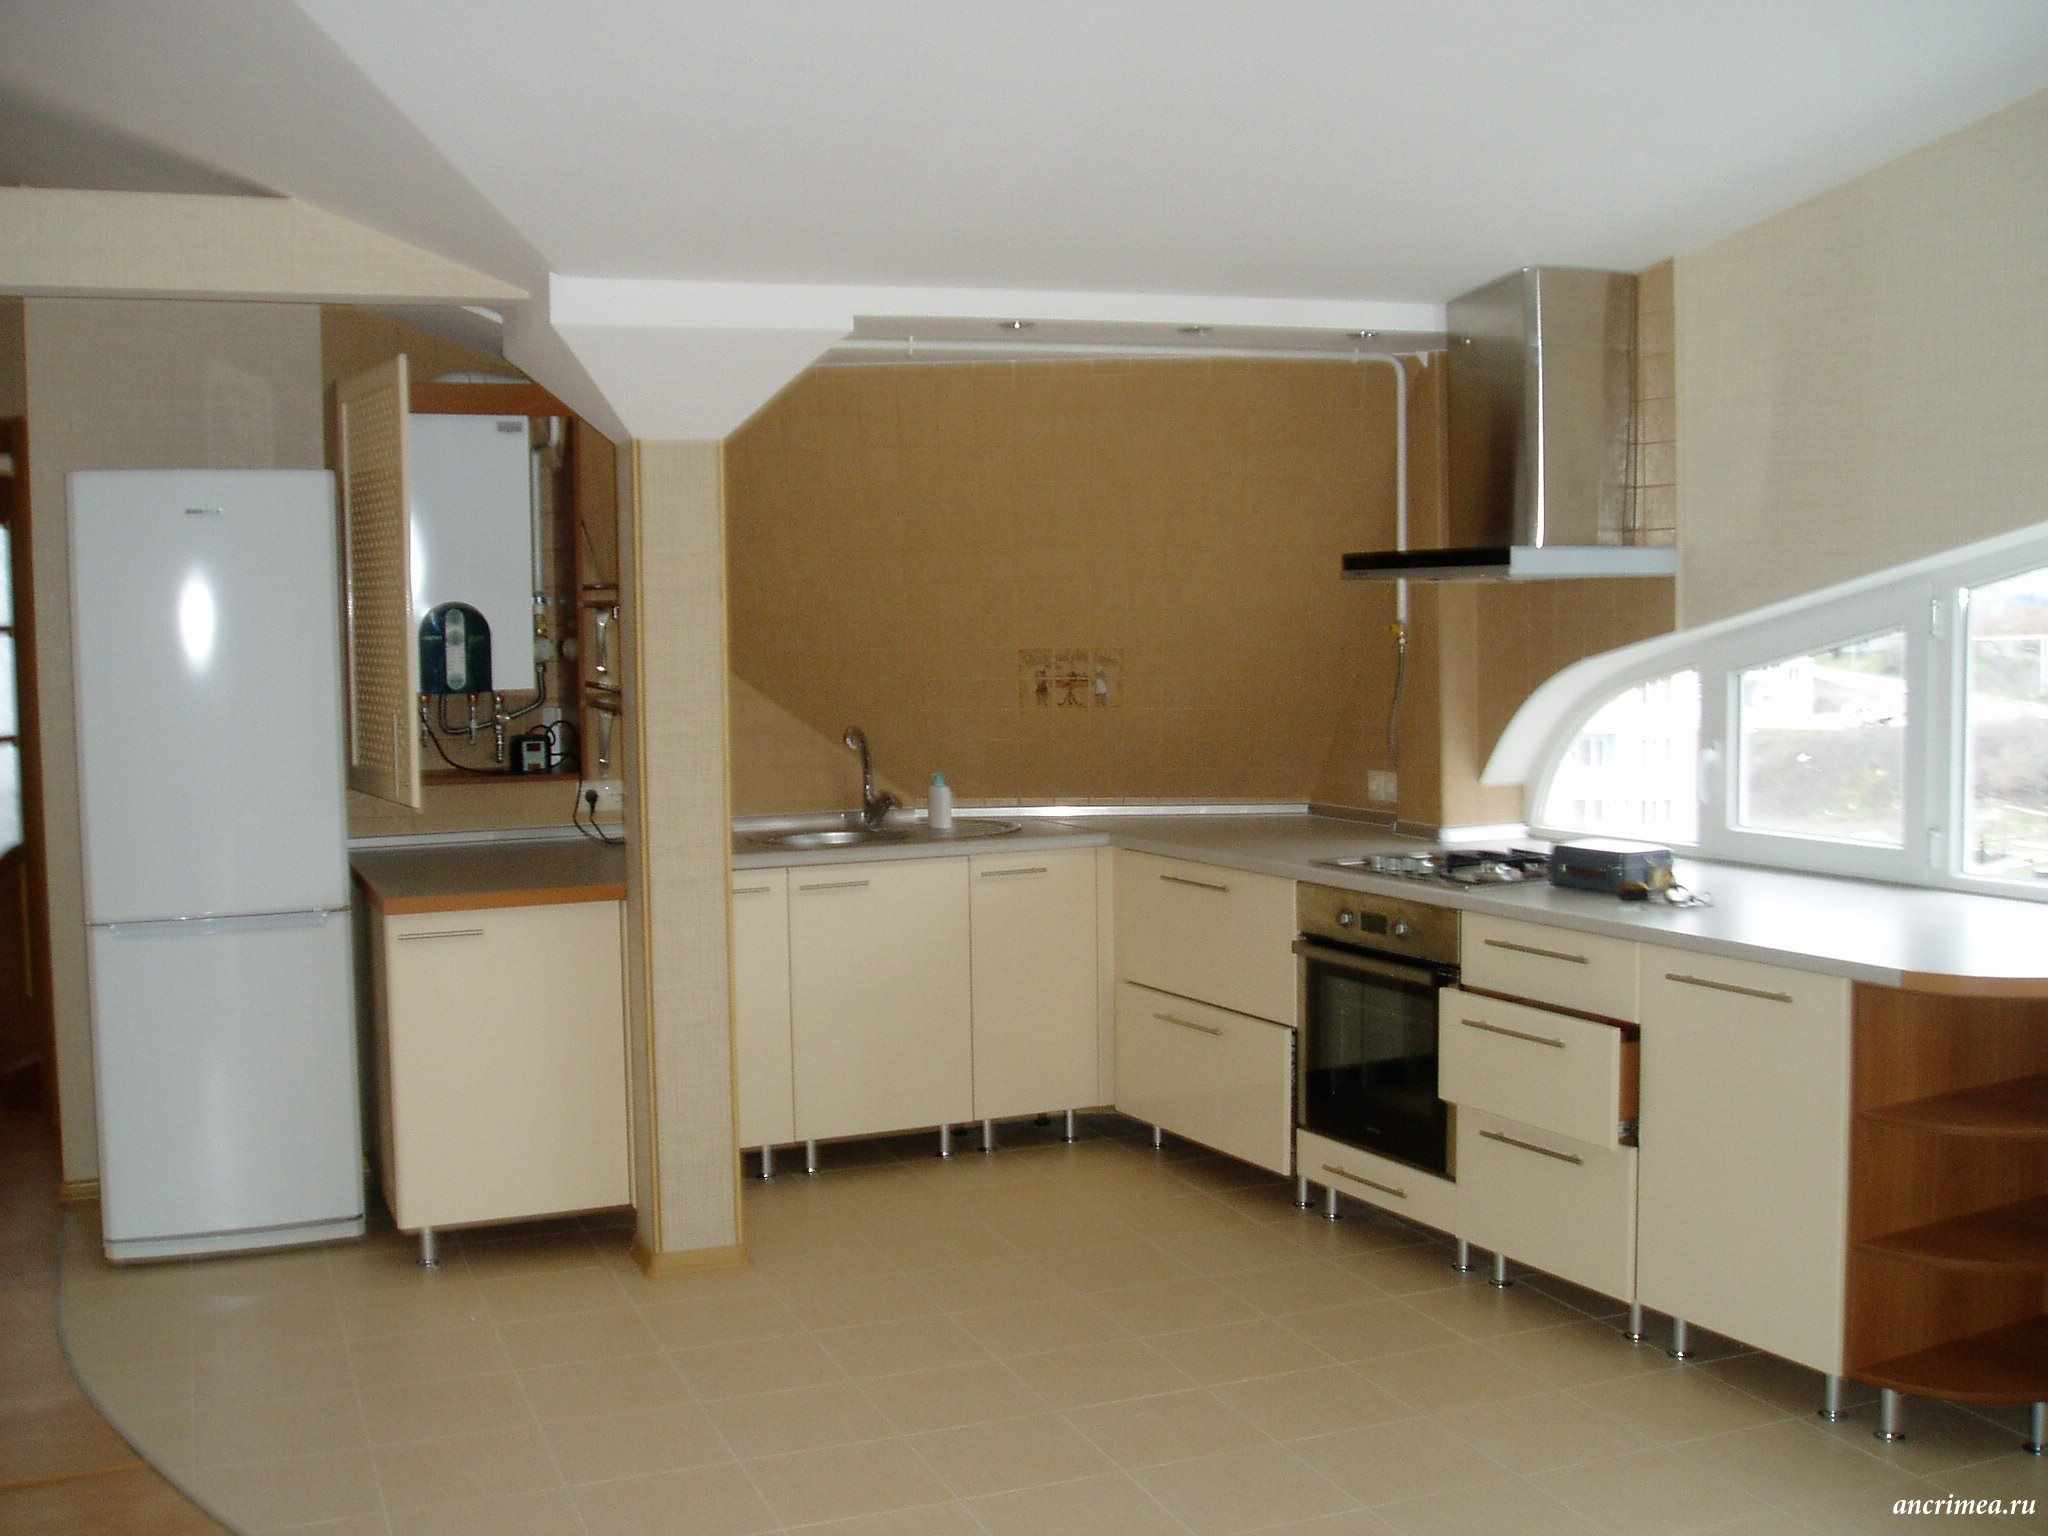 An example of a light style kitchen with a gas boiler